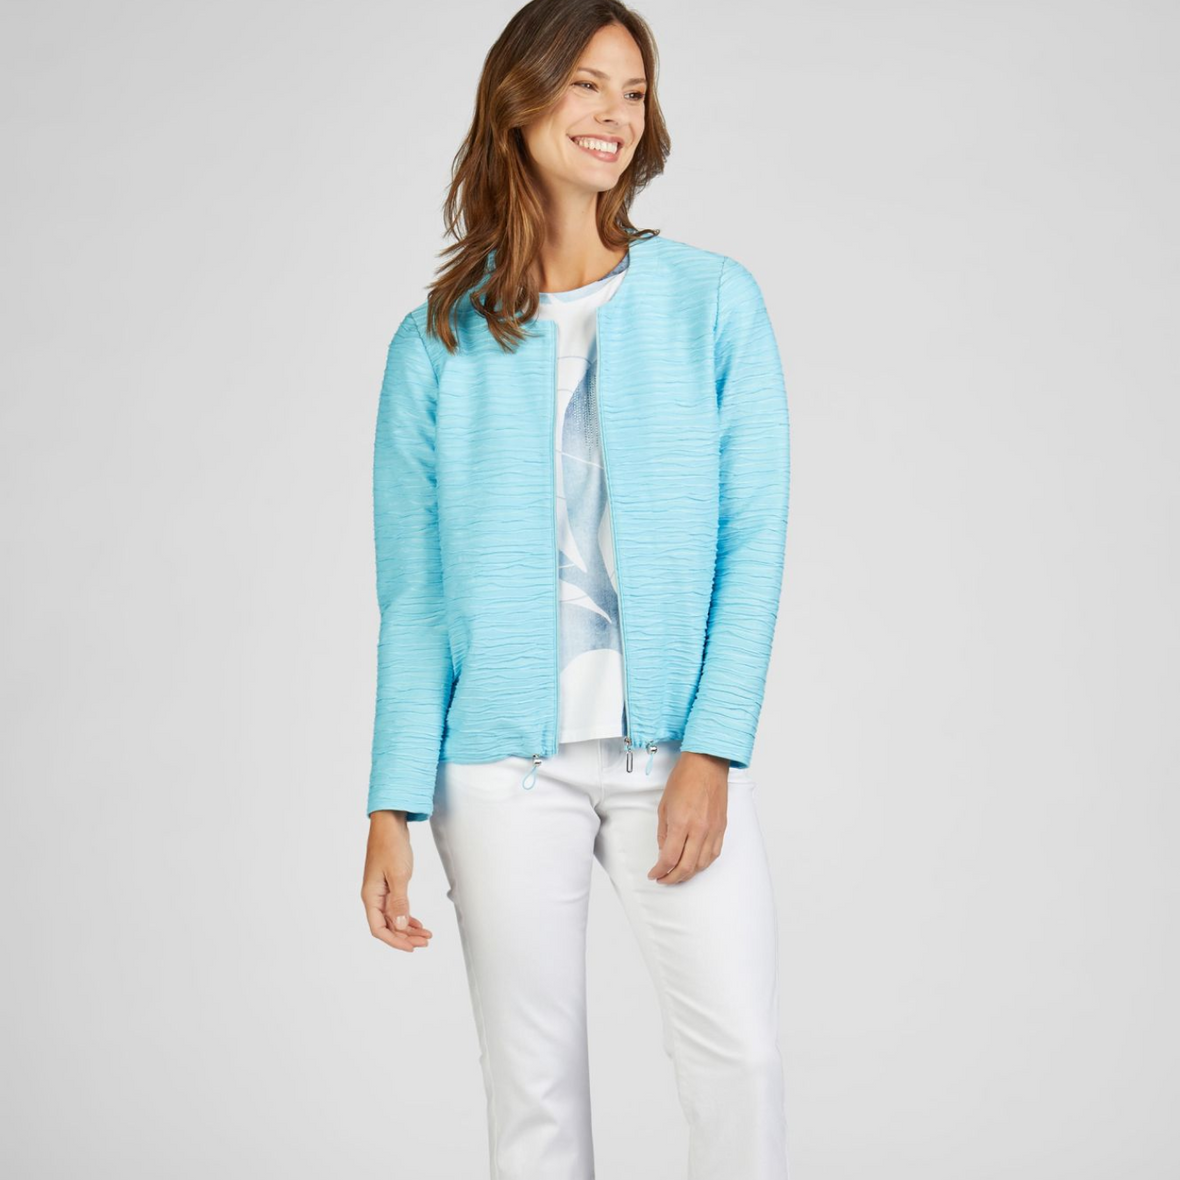 female model looking away from camera smiling wearing rabe jacket in blue colour